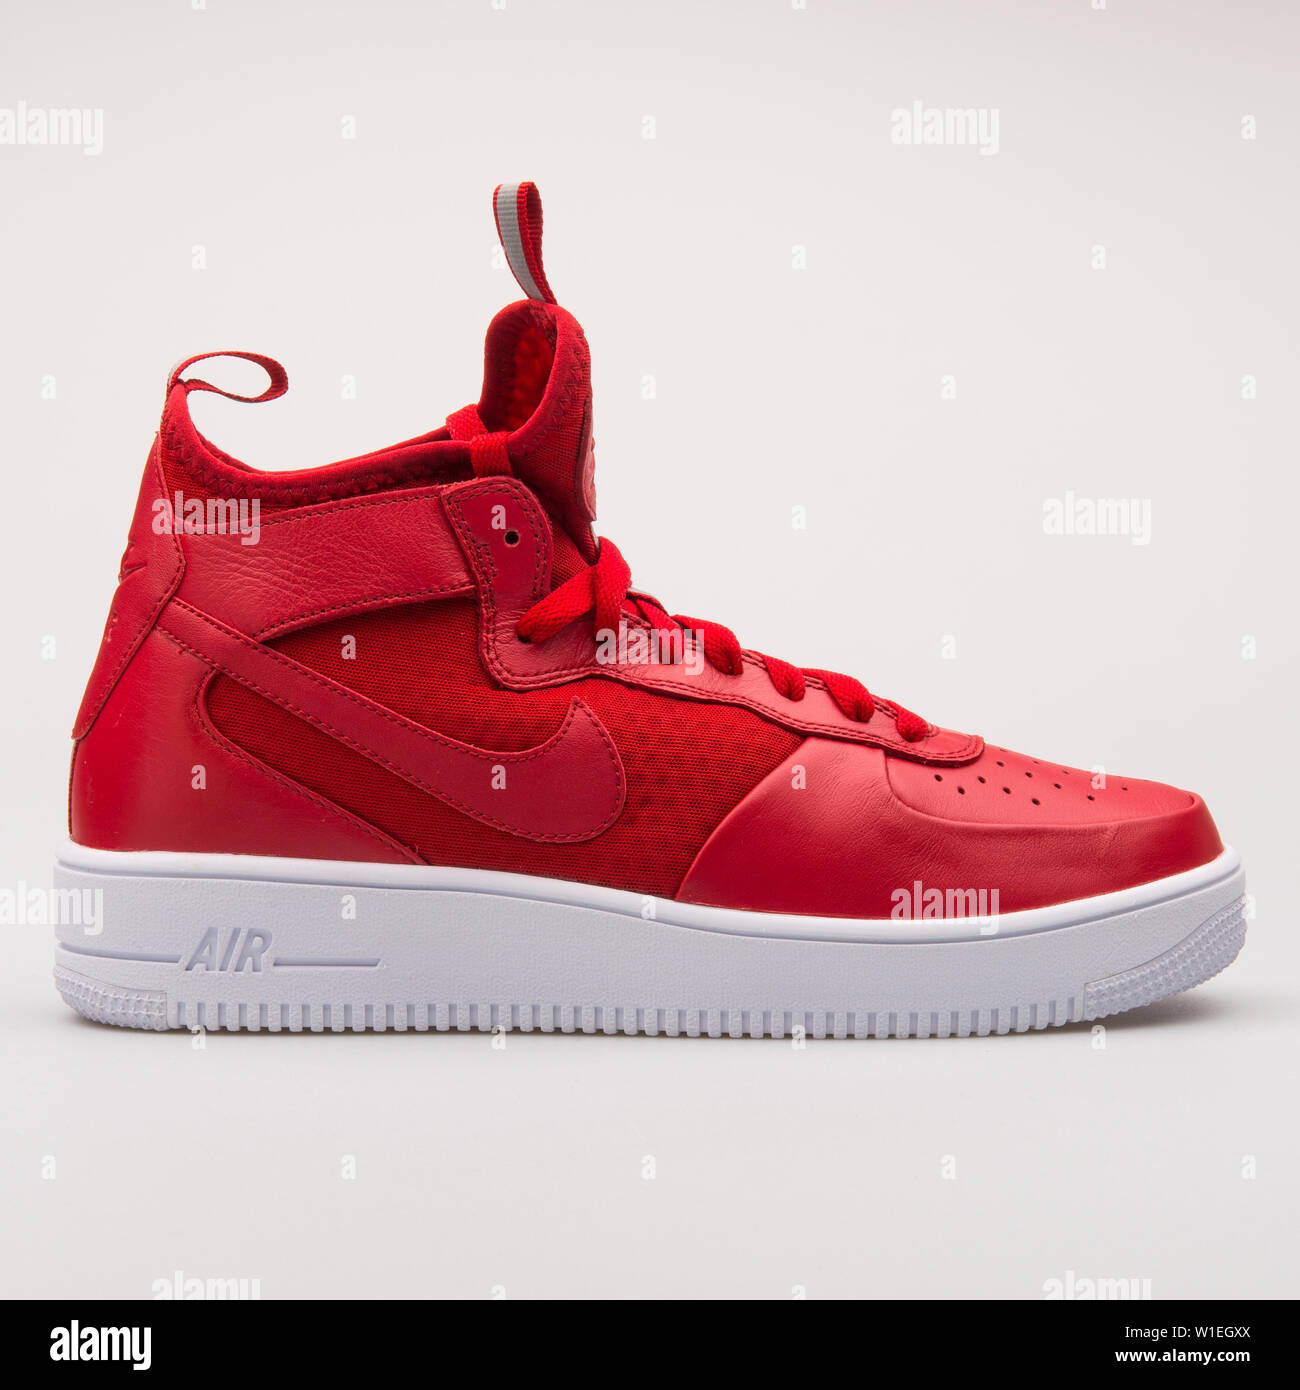 VIENNA, AUSTRIA - AUGUST 23, 2017: Nike Air Force 1 Ultraforce Mid red  sneaker on white background Stock Photo - Alamy